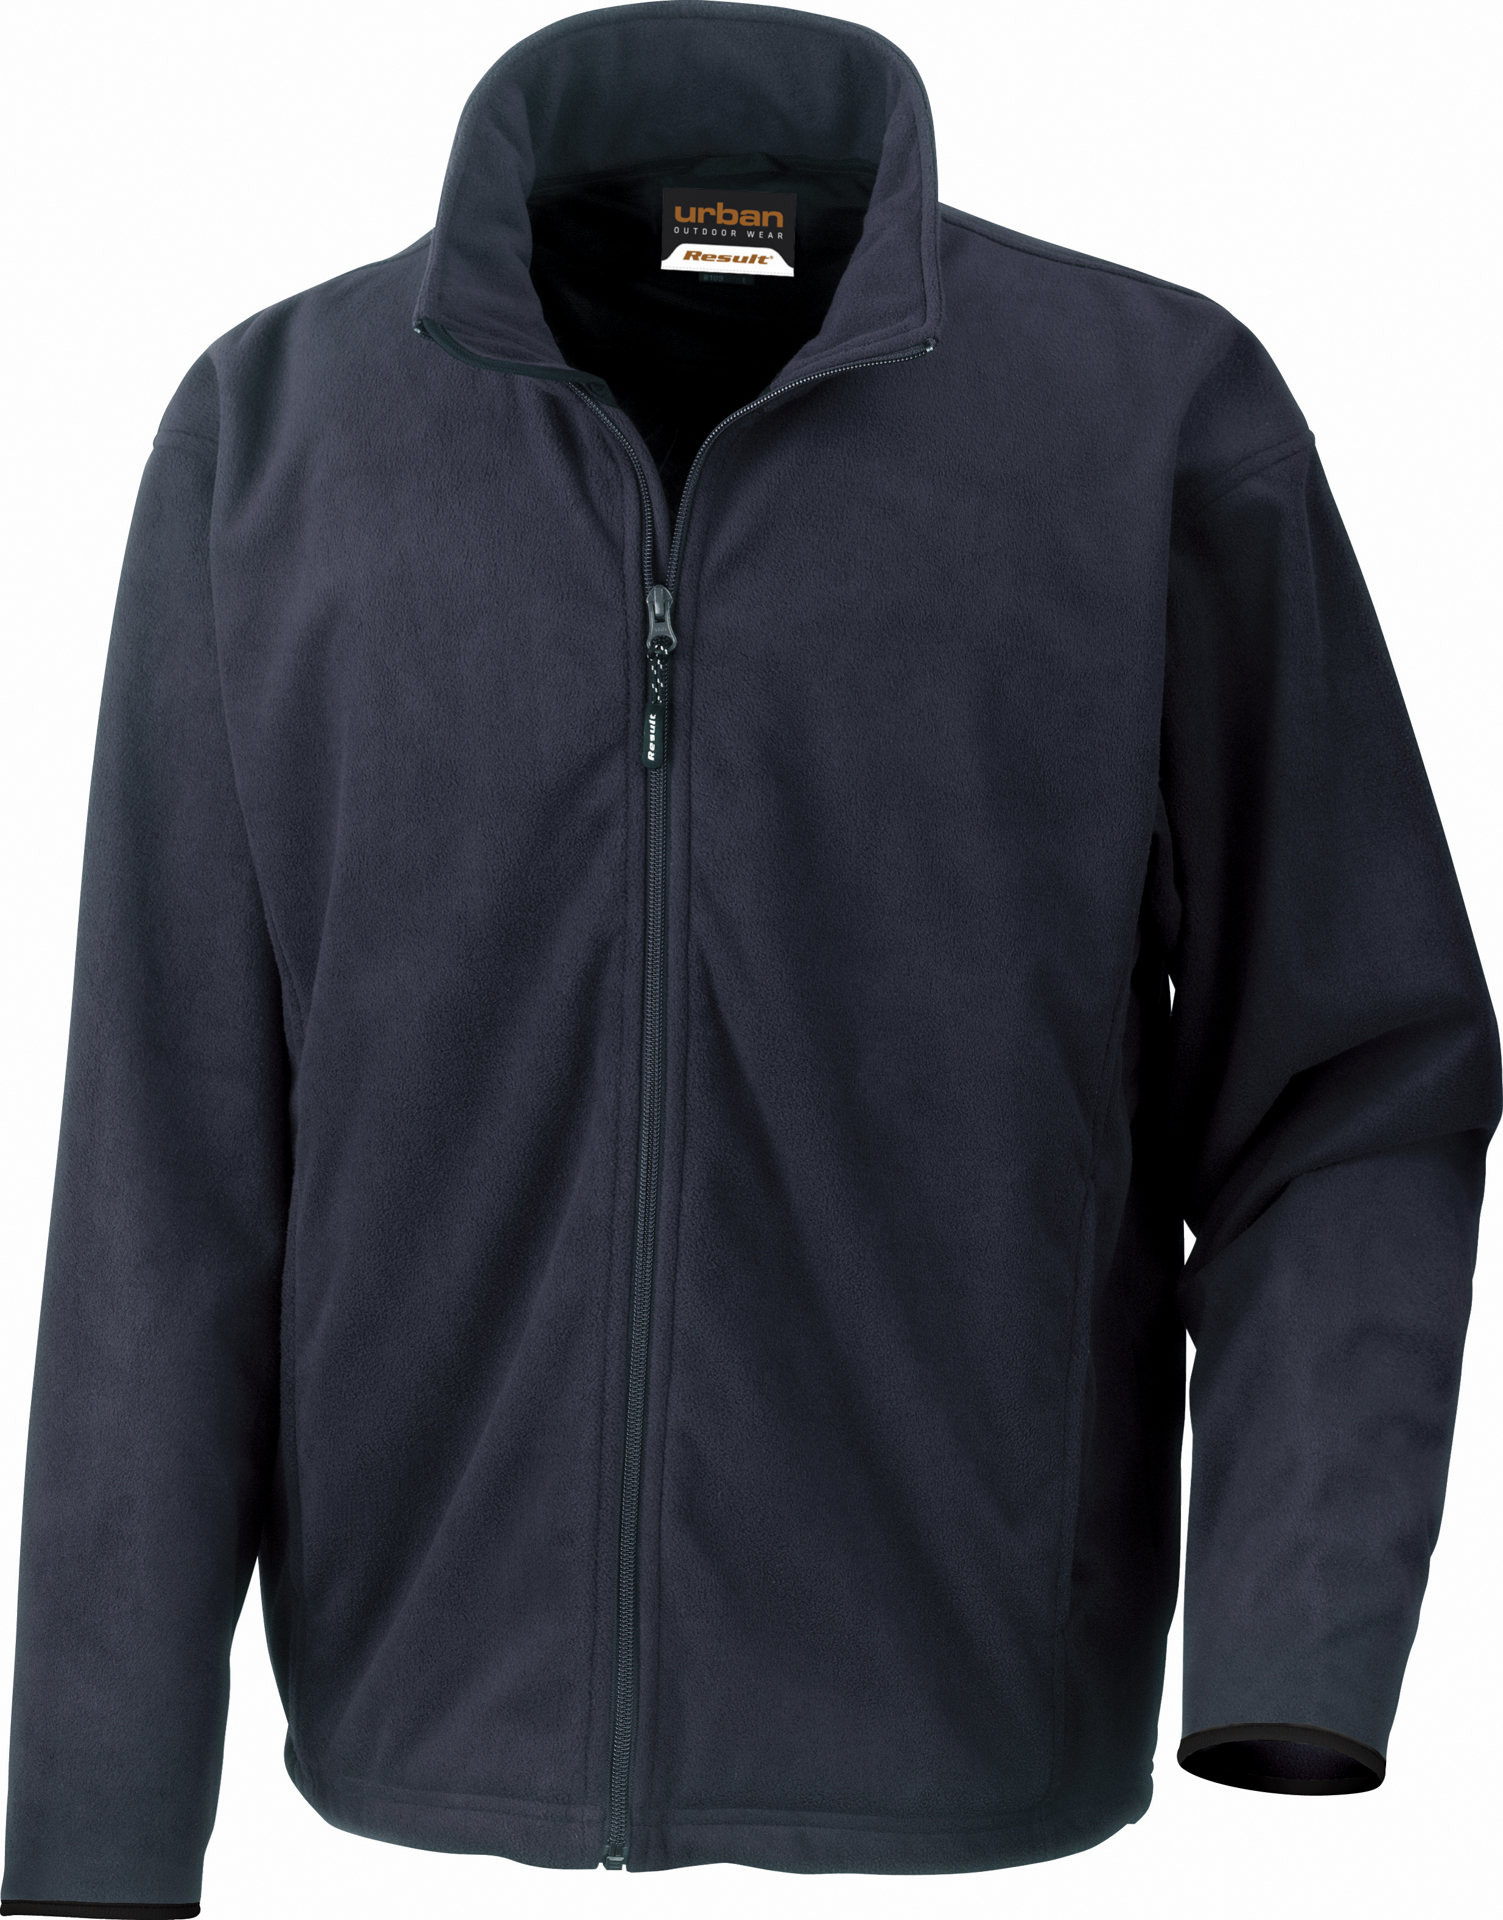 Extreme Climate Stopper Fleece in navy with full length zip